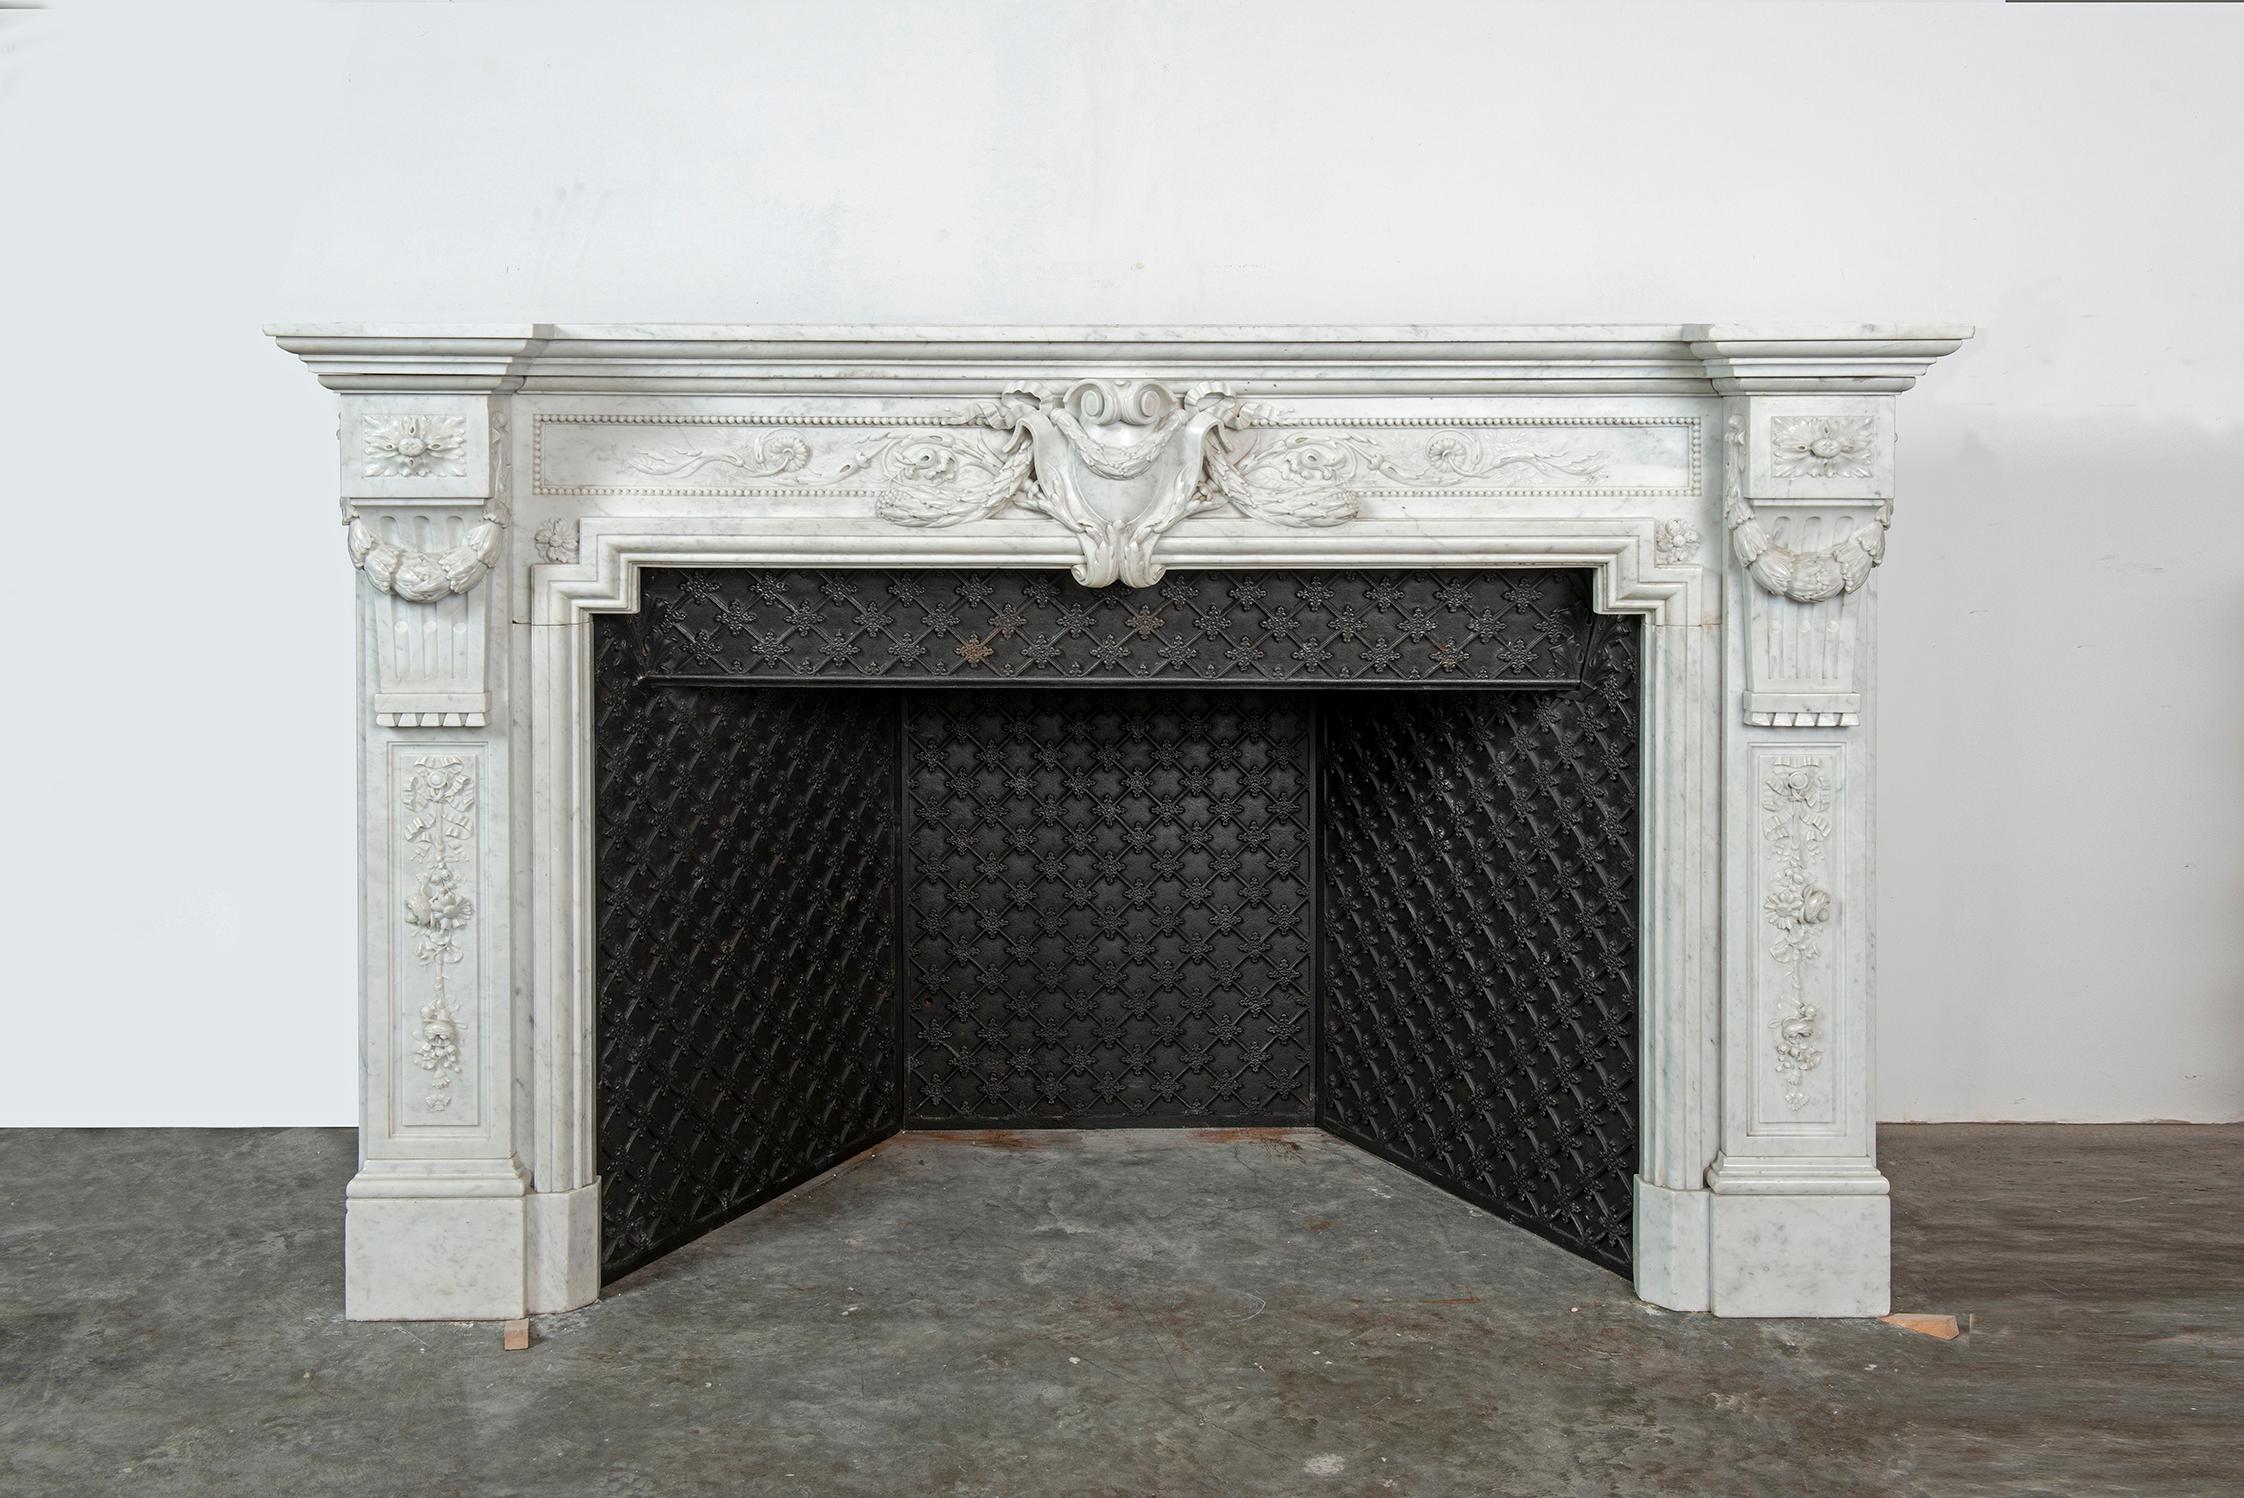 Spectacular and Amazing French Louis XVI style fireplace mantel in beautiful Italian Carrara white marble.

This mantel is decorated with exquisite and exuberant carvings, with a beautiful decorative cast iron interior.

It is in a lovely